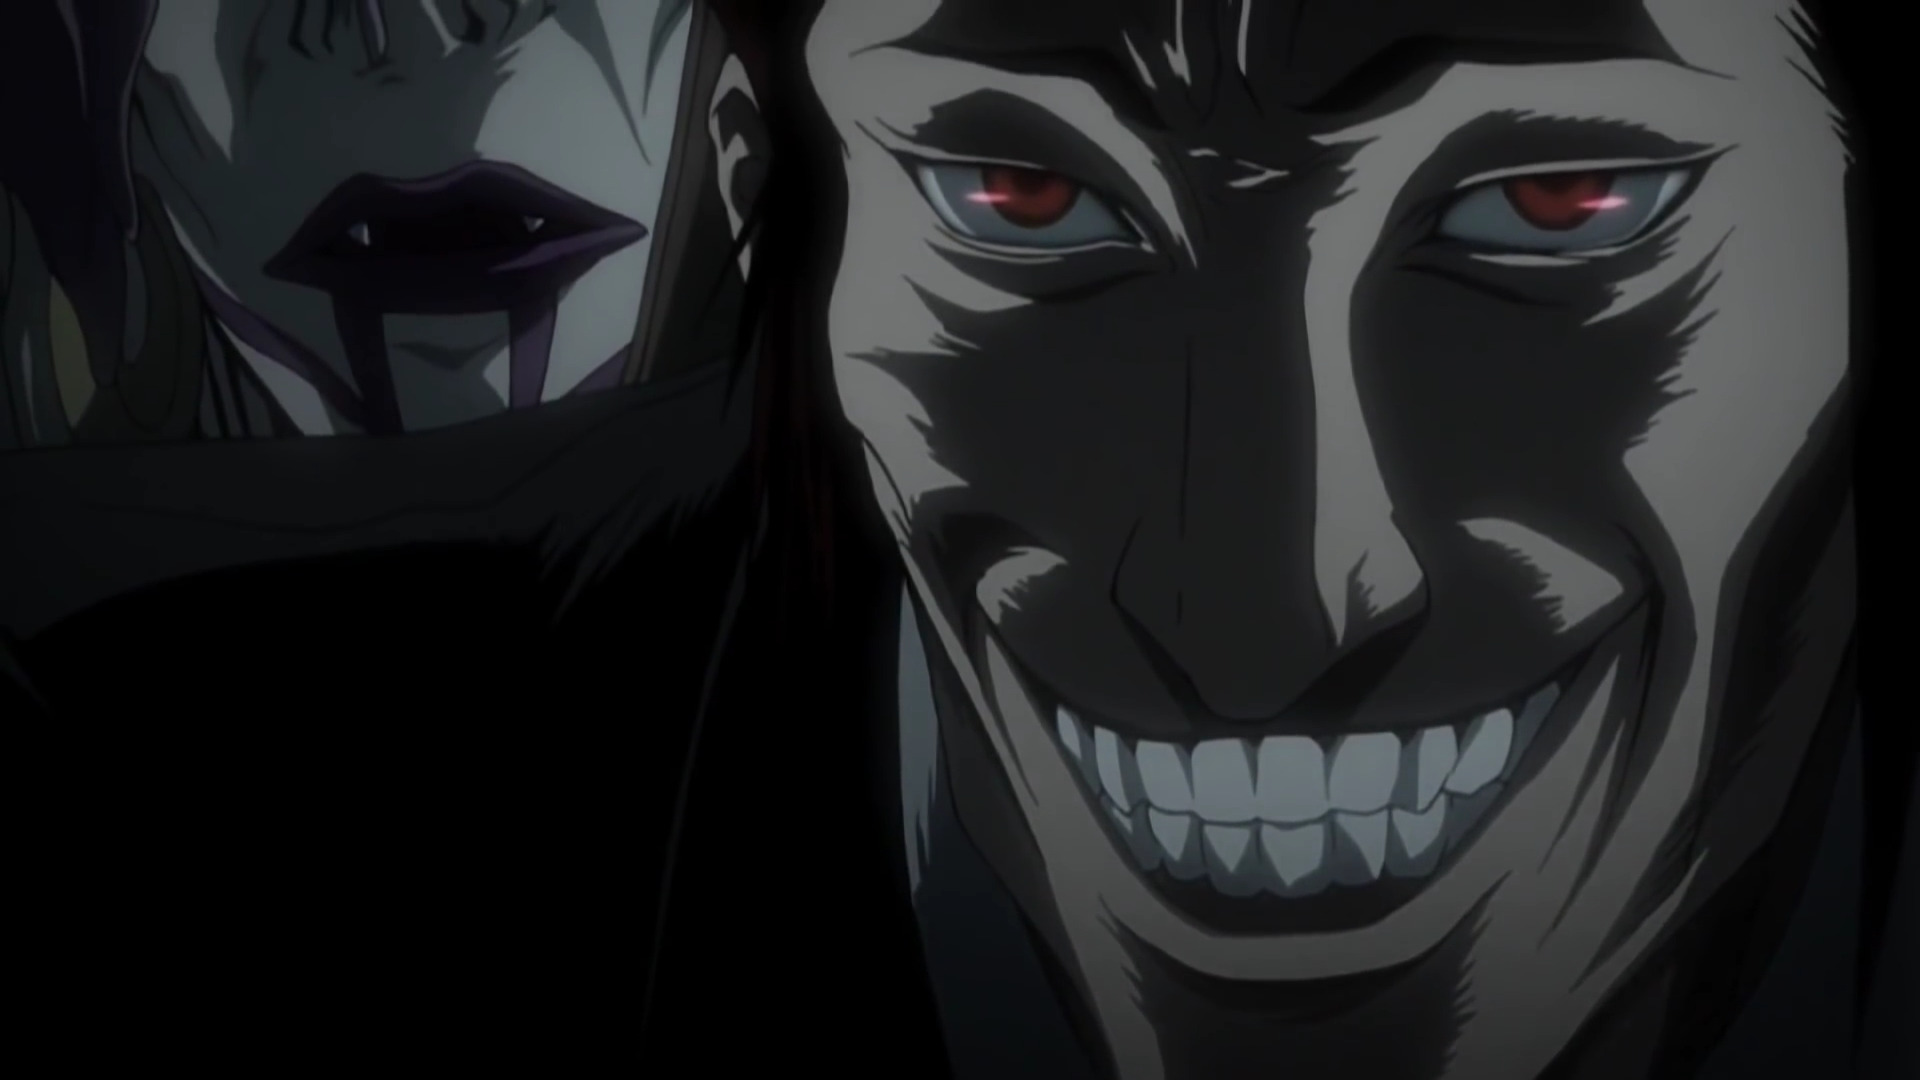 The Evaluation Zone : Top Ten Reasons Why I Hate Death Note (And